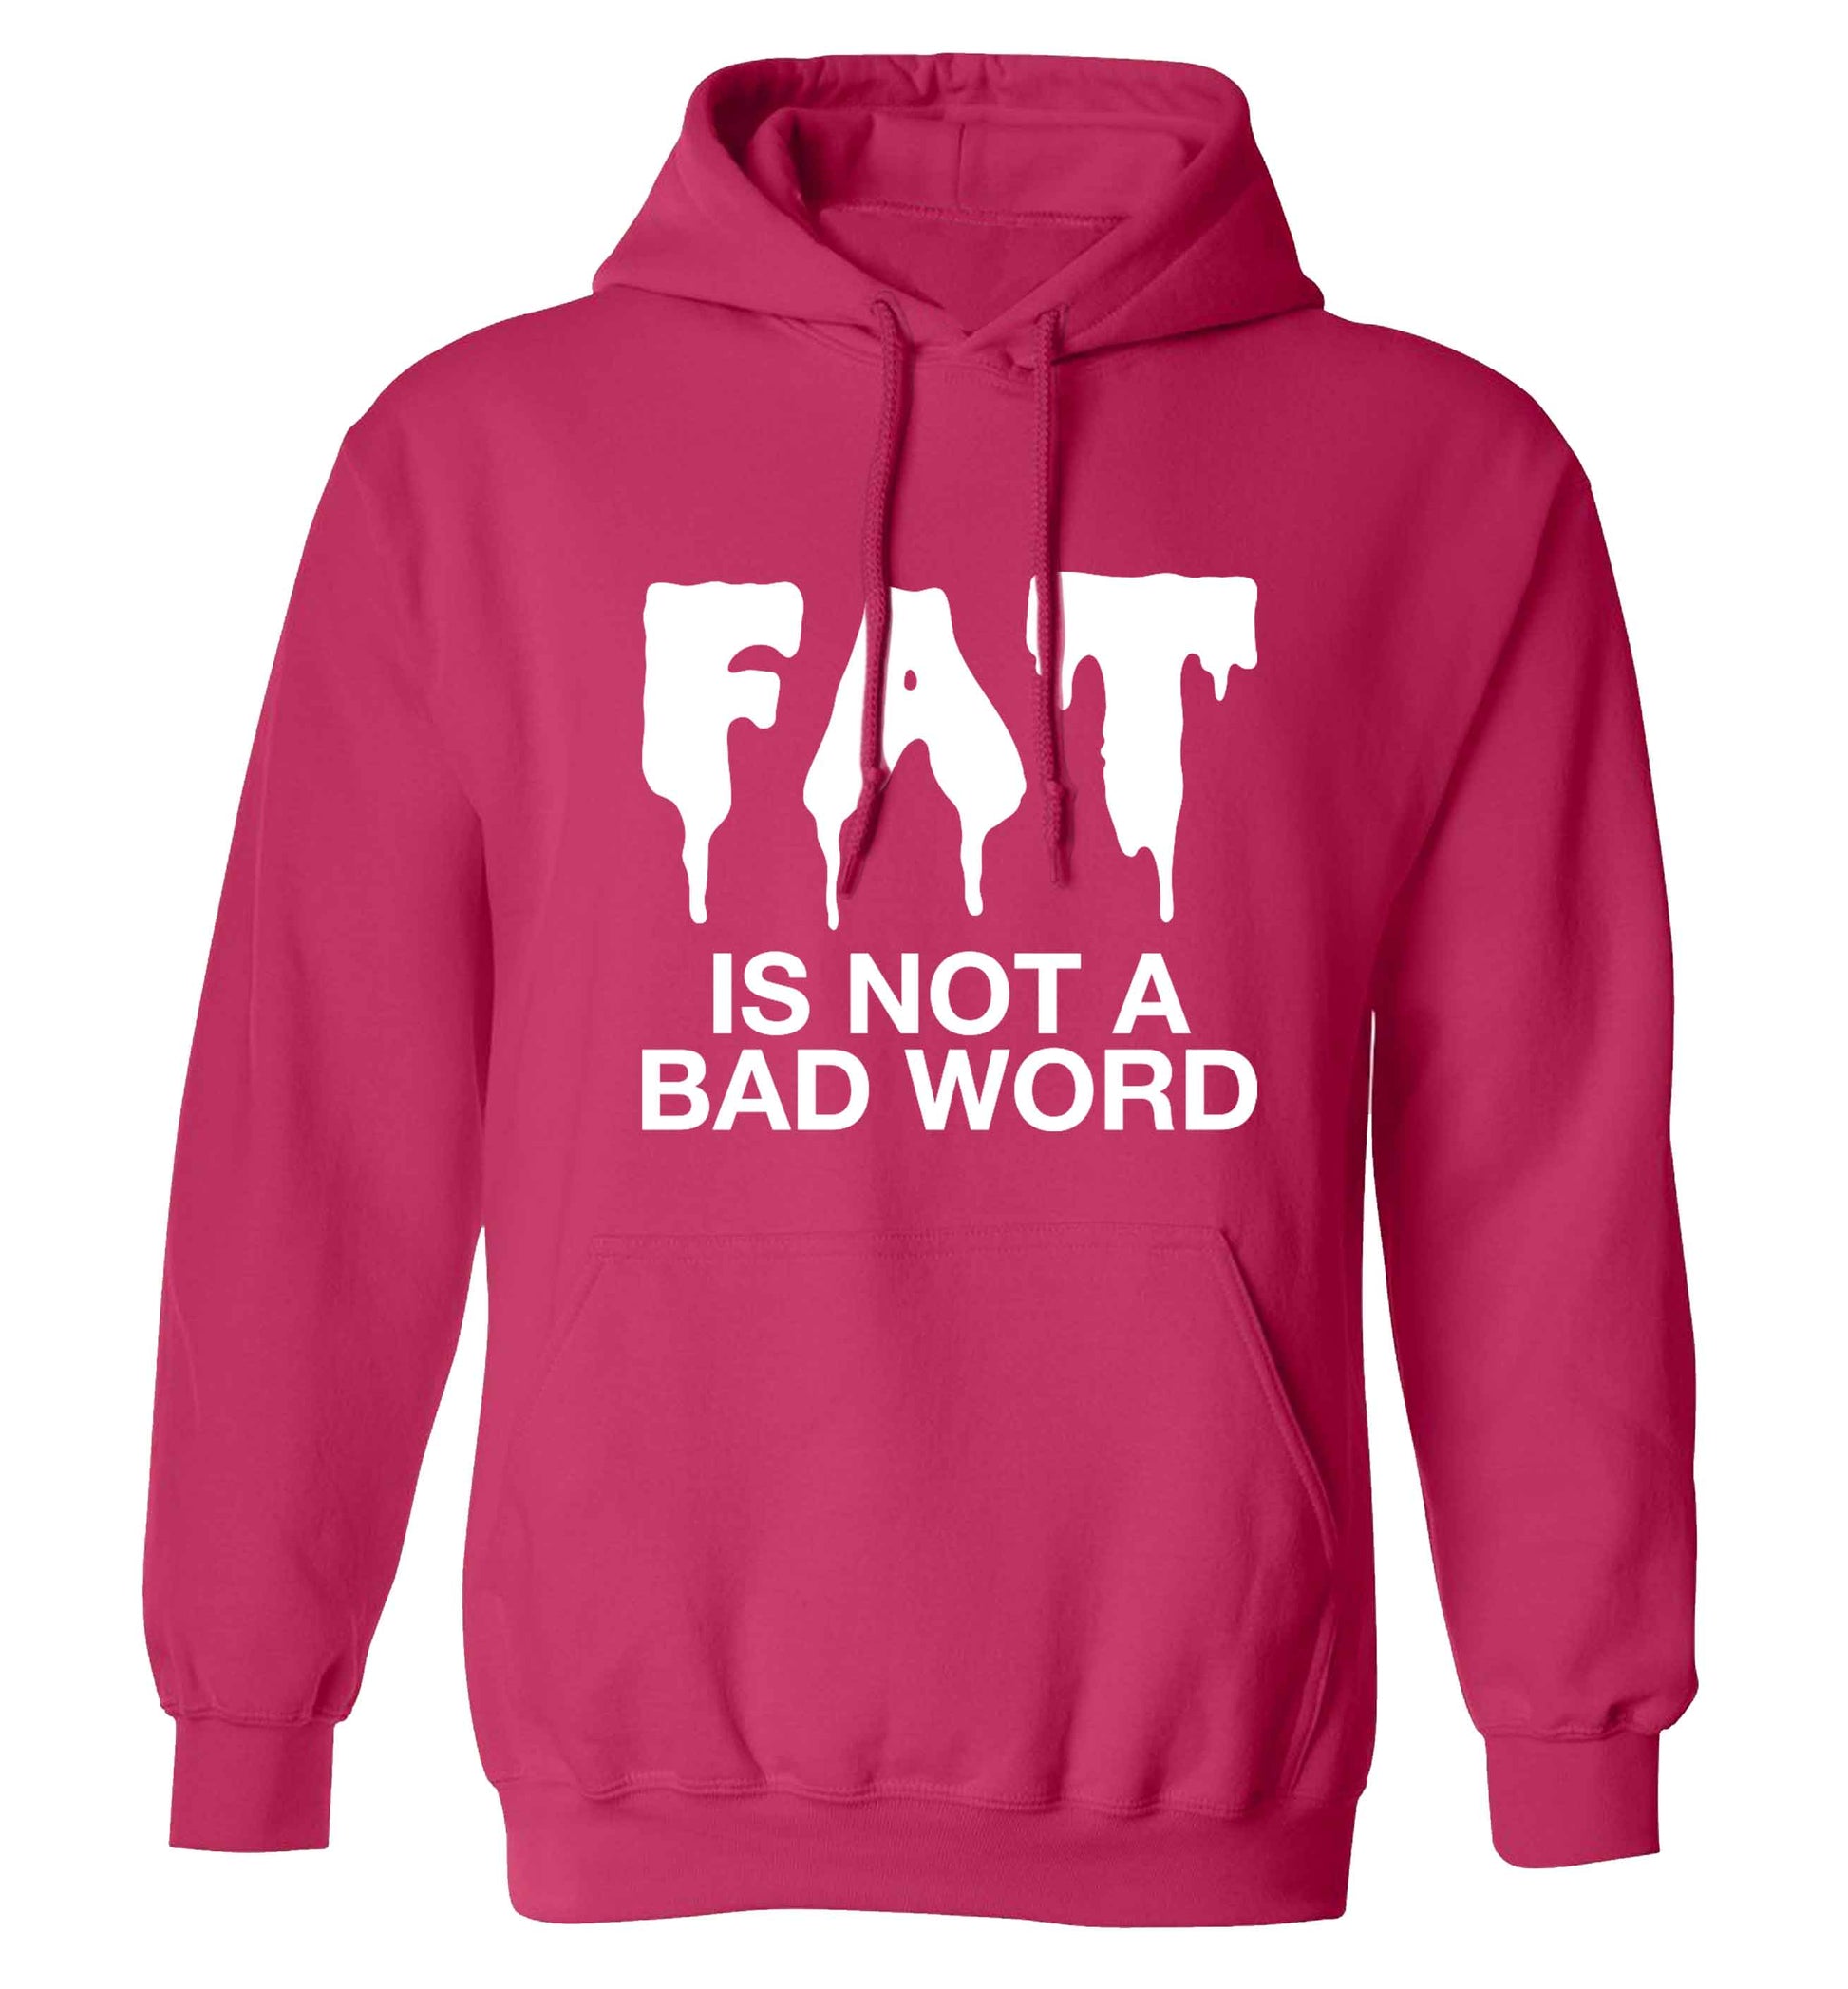 Fat is not a bad word adults unisex pink hoodie 2XL